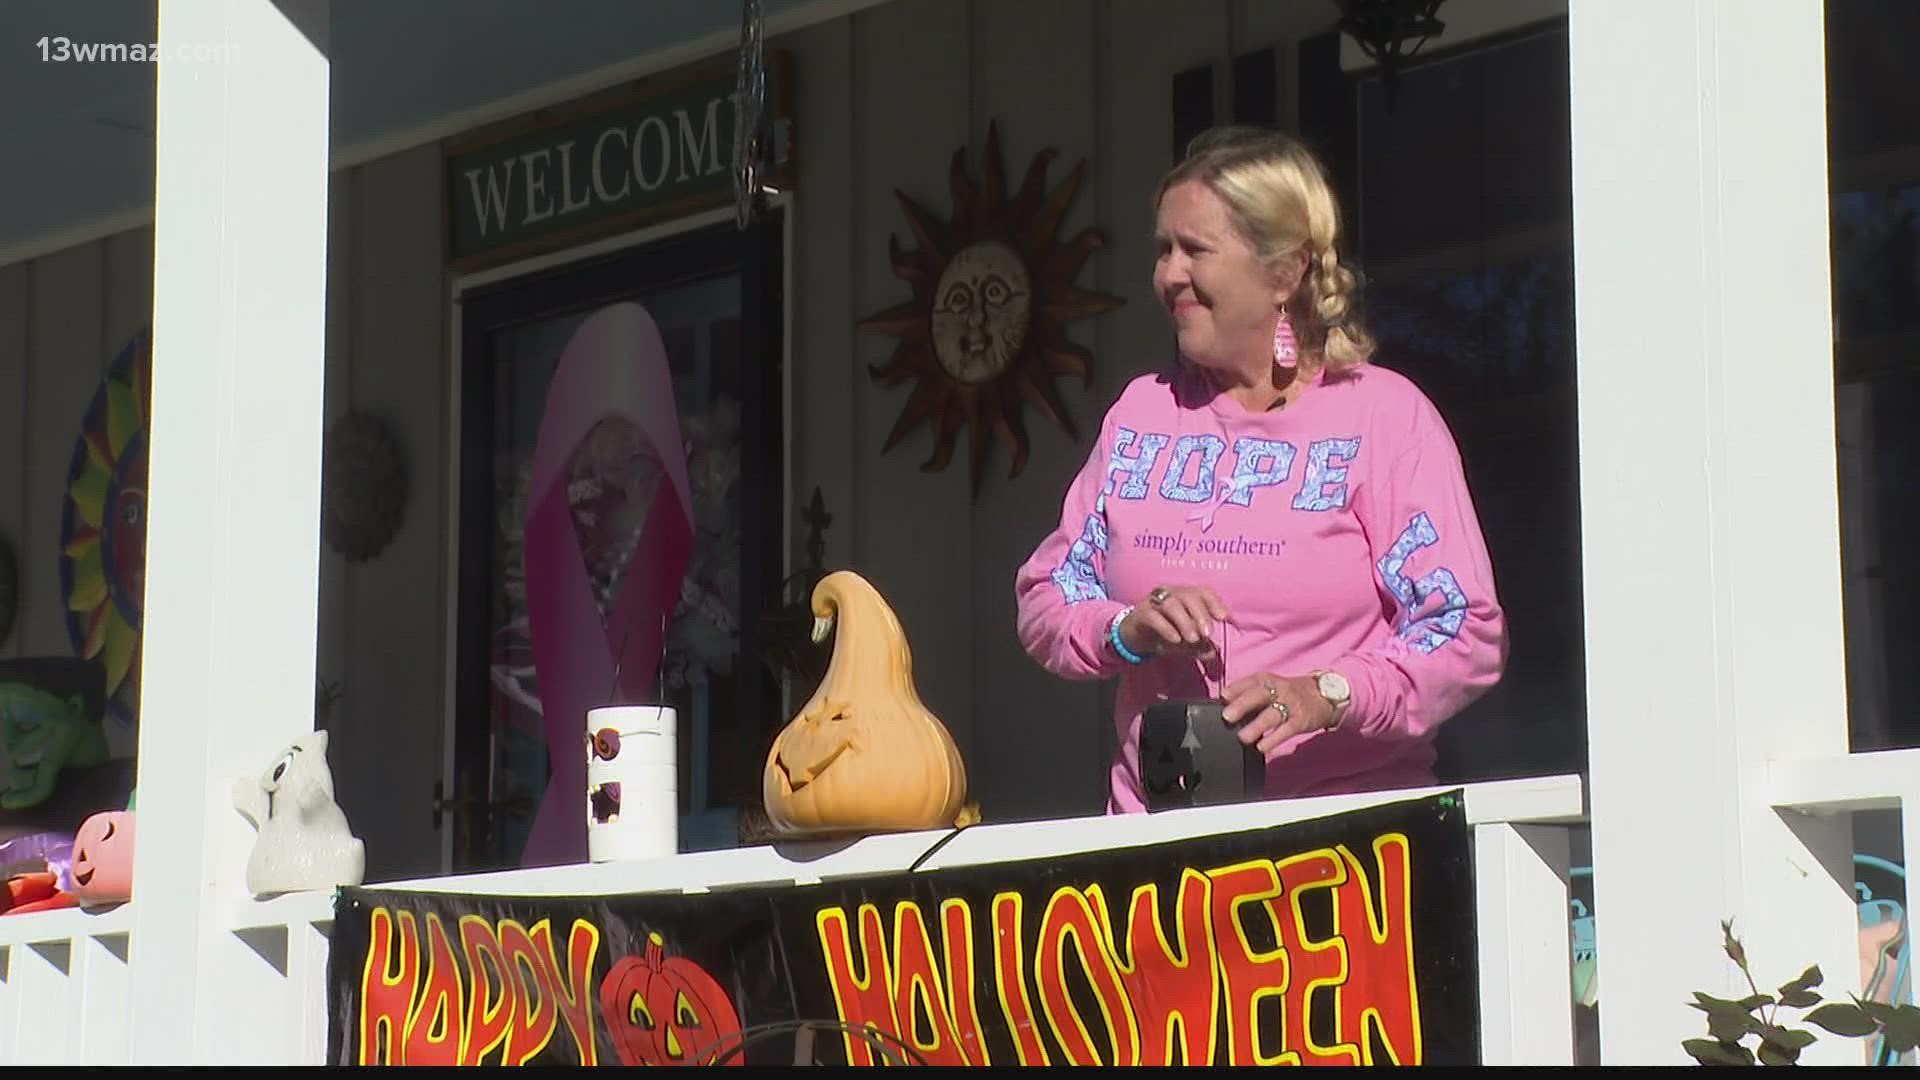 A Baldwin County woman who celebrates Halloween in a big way is also a breast cancer survivor, and the holiday has a deeper meaning for her this year.